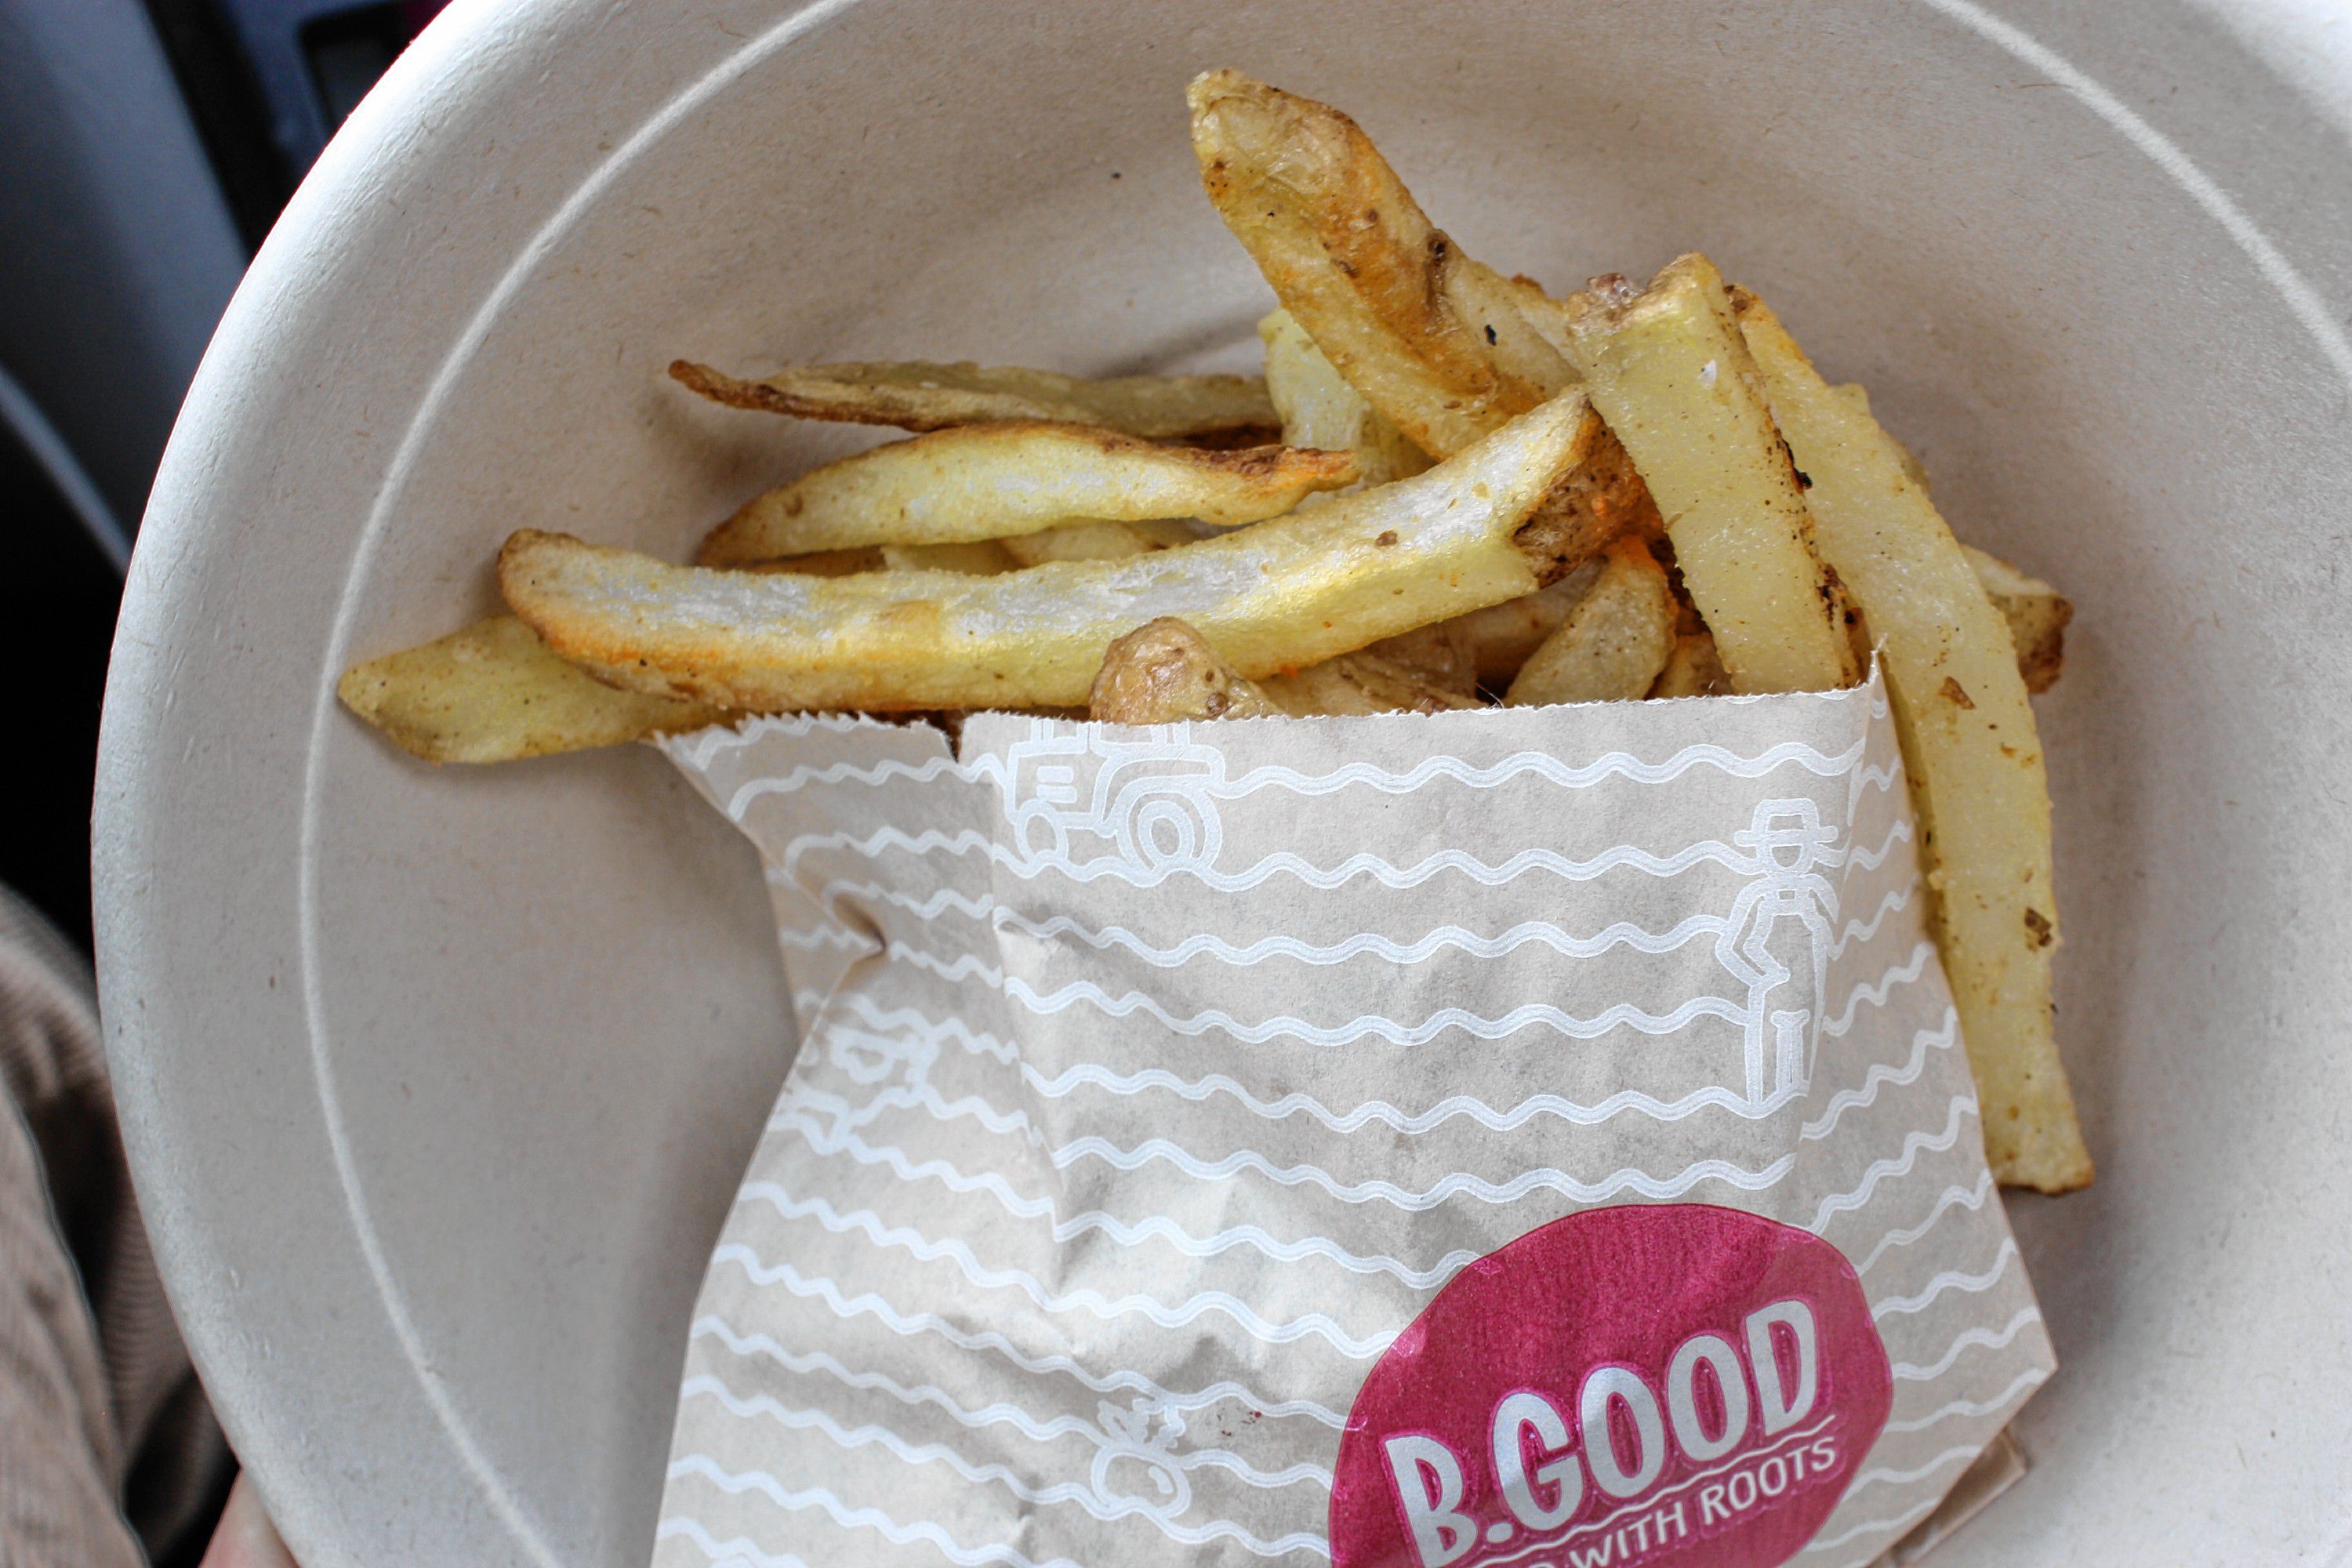 An order of fries from B.Good -- they only come in one size, and that's all you need.  JON BODELL / Insider staff